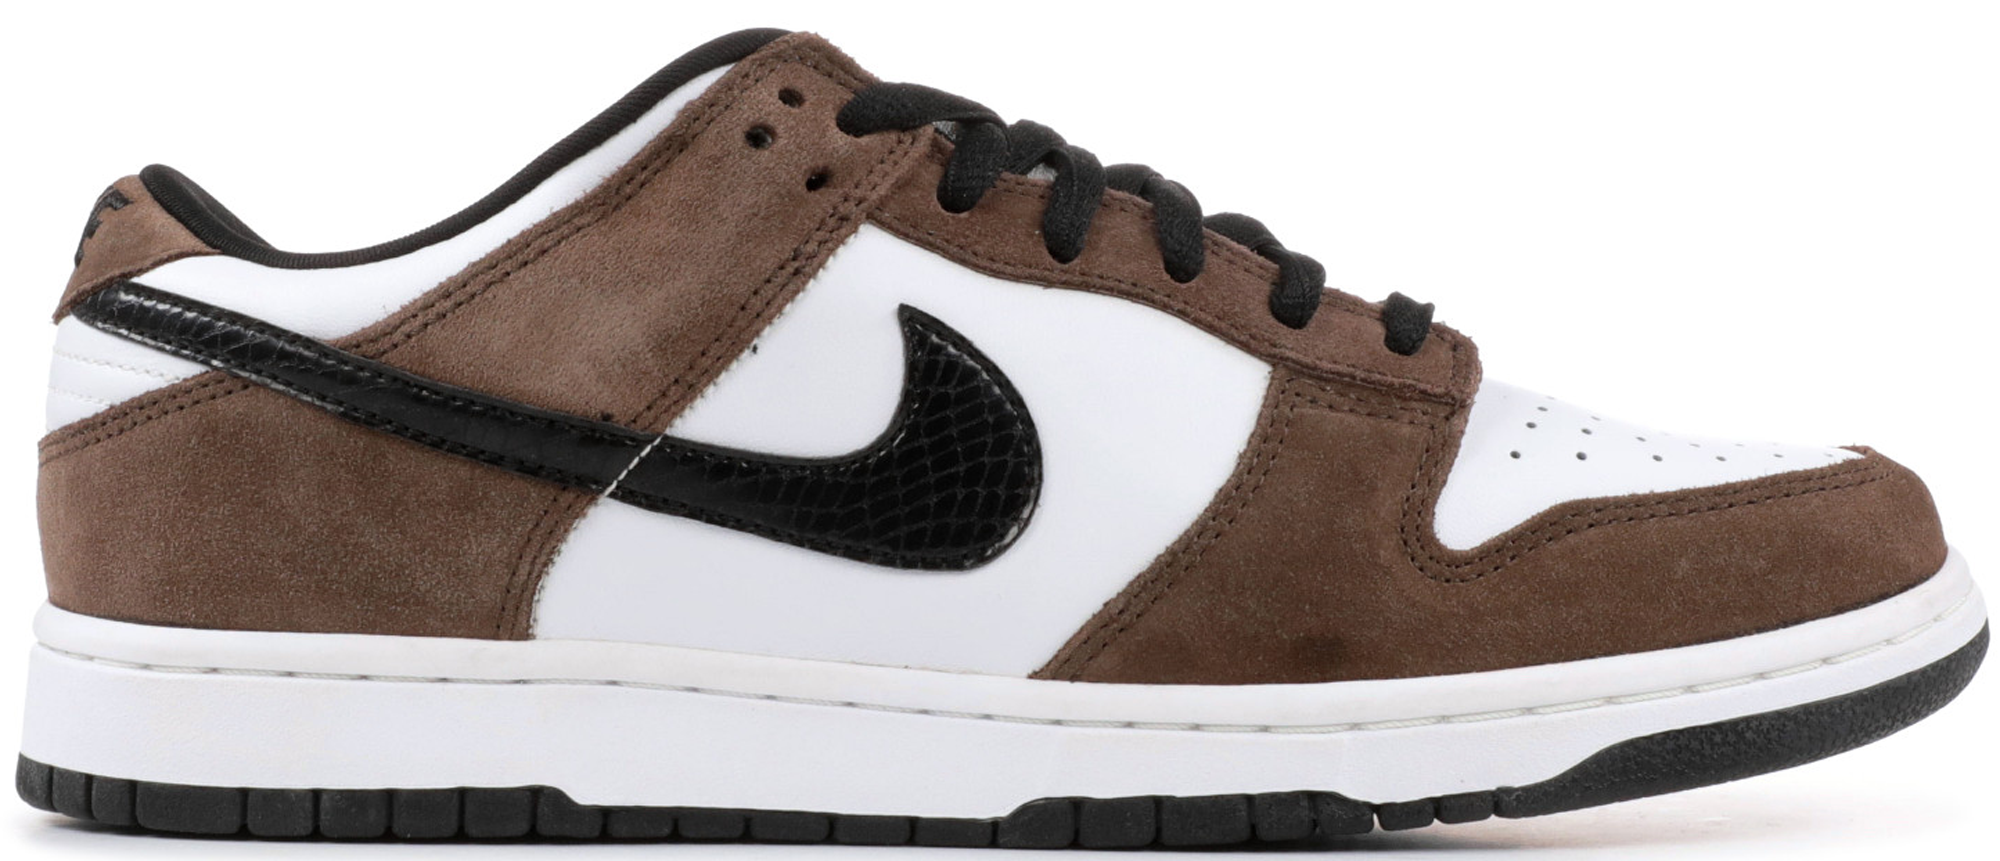 nike black leather dunks sneakers